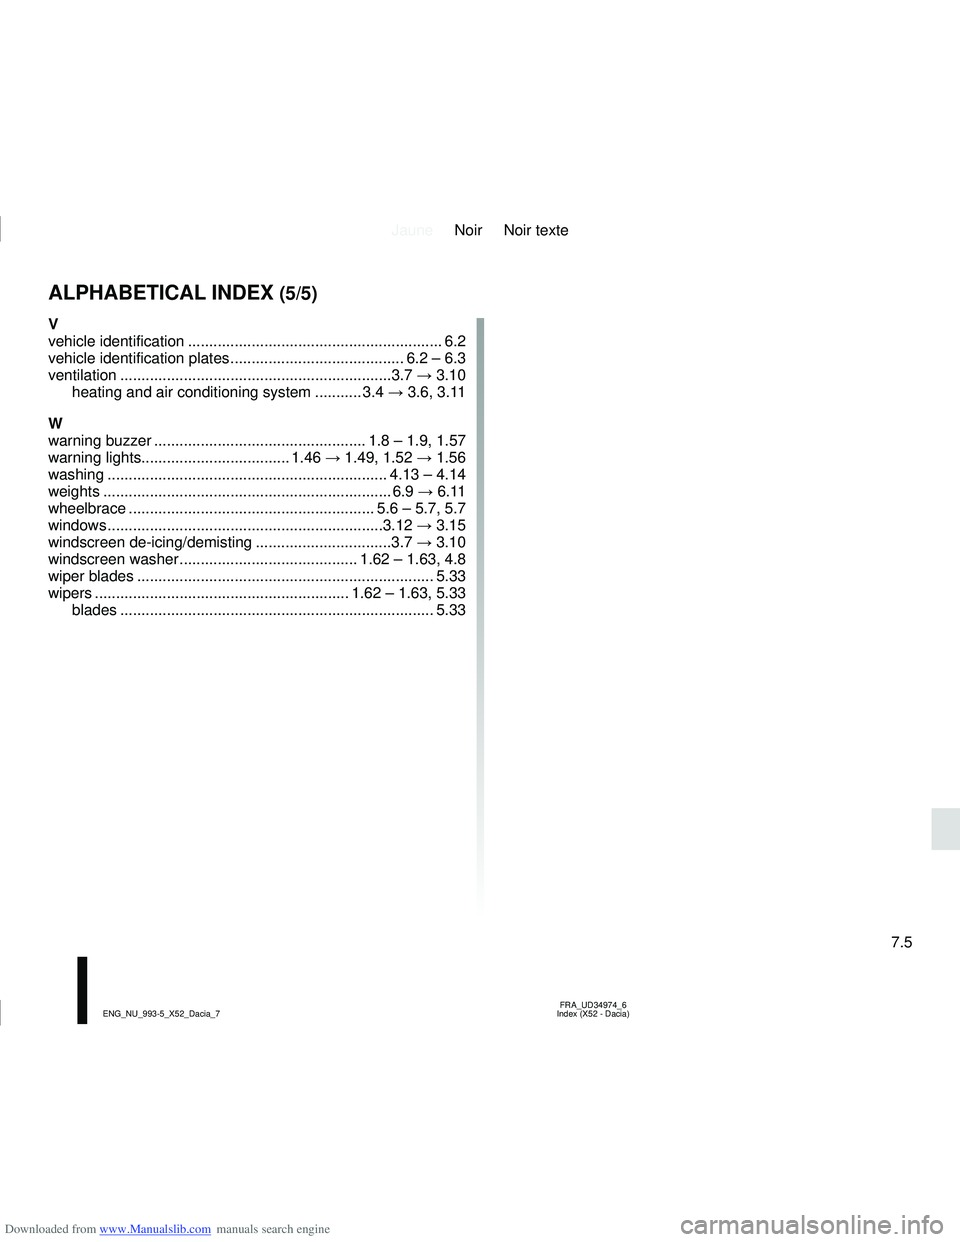 DACIA SANDERO 2010  Owners Manual Downloaded from www.Manualslib.com manuals search engine JauneNoir Noir texte
7.5
FRA_UD34974_6
Index (X52 - Dacia)
ENG_NU_993-5_X52_Dacia_7
ALPHABETICAL INDEX (5/5)
V
vehicle  identification ........